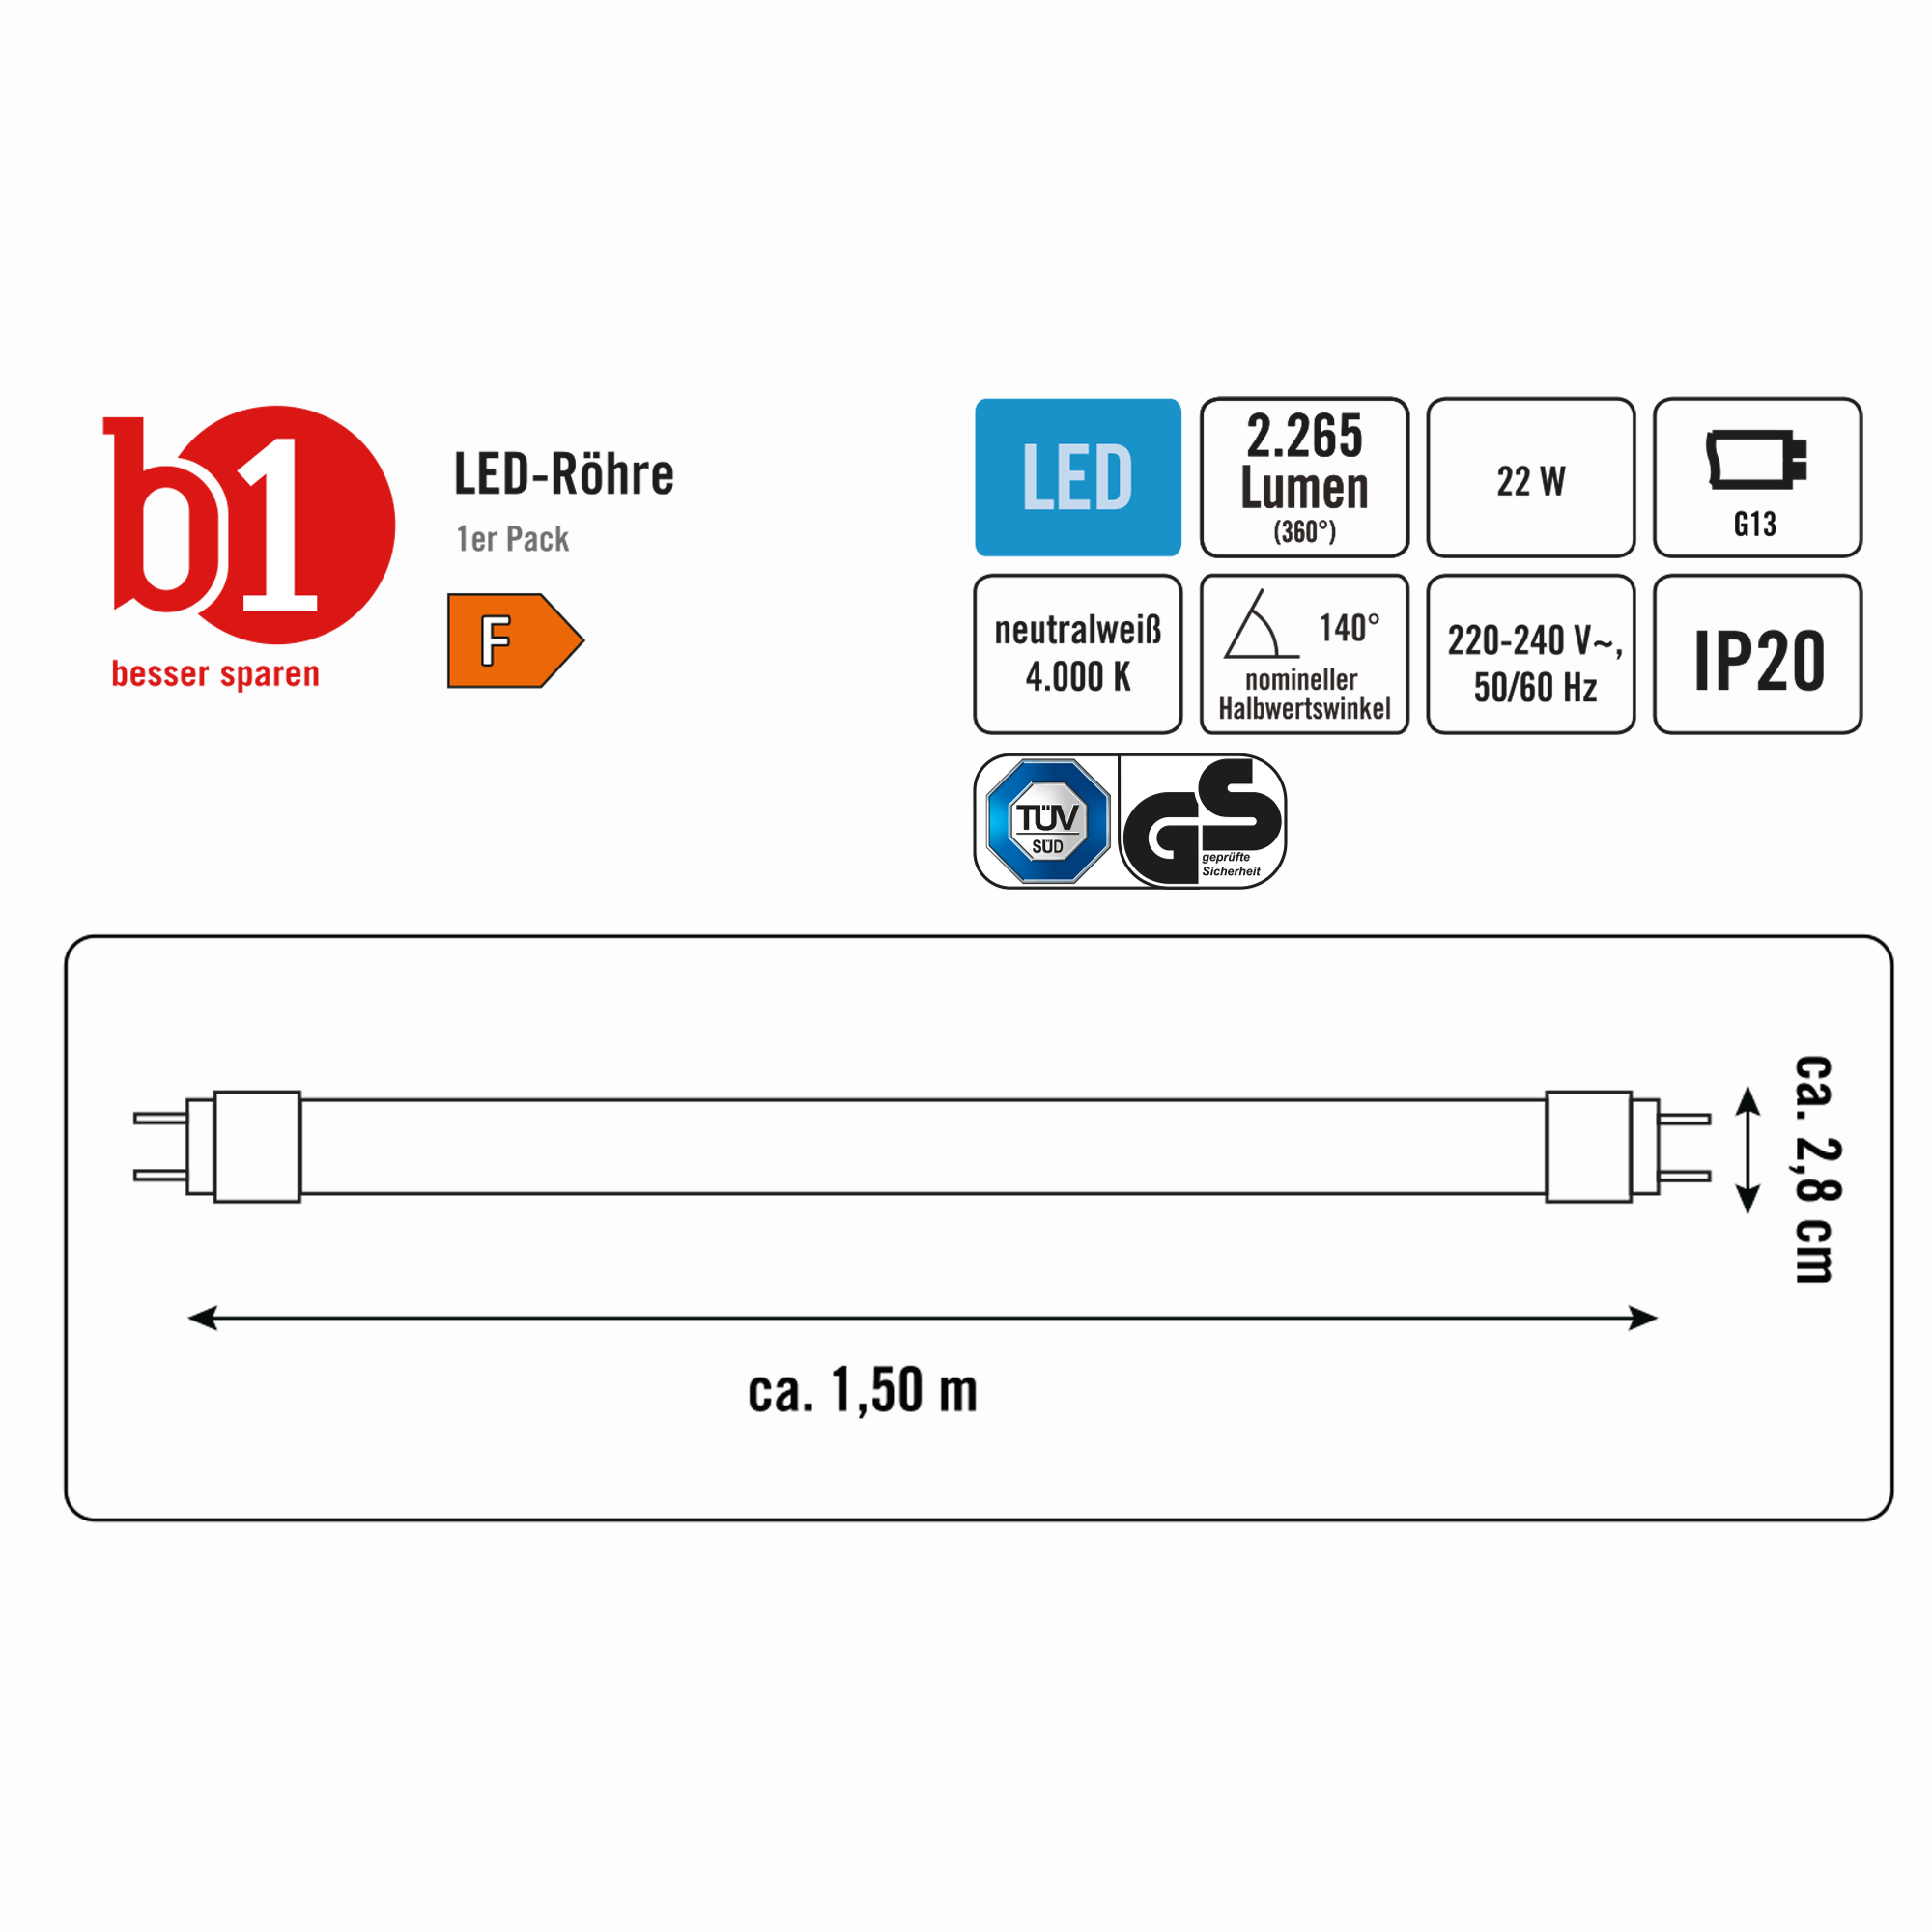 LED-Röhre 150 cm, G13 22 W 2265 lm neutralweiß 4000K + product picture